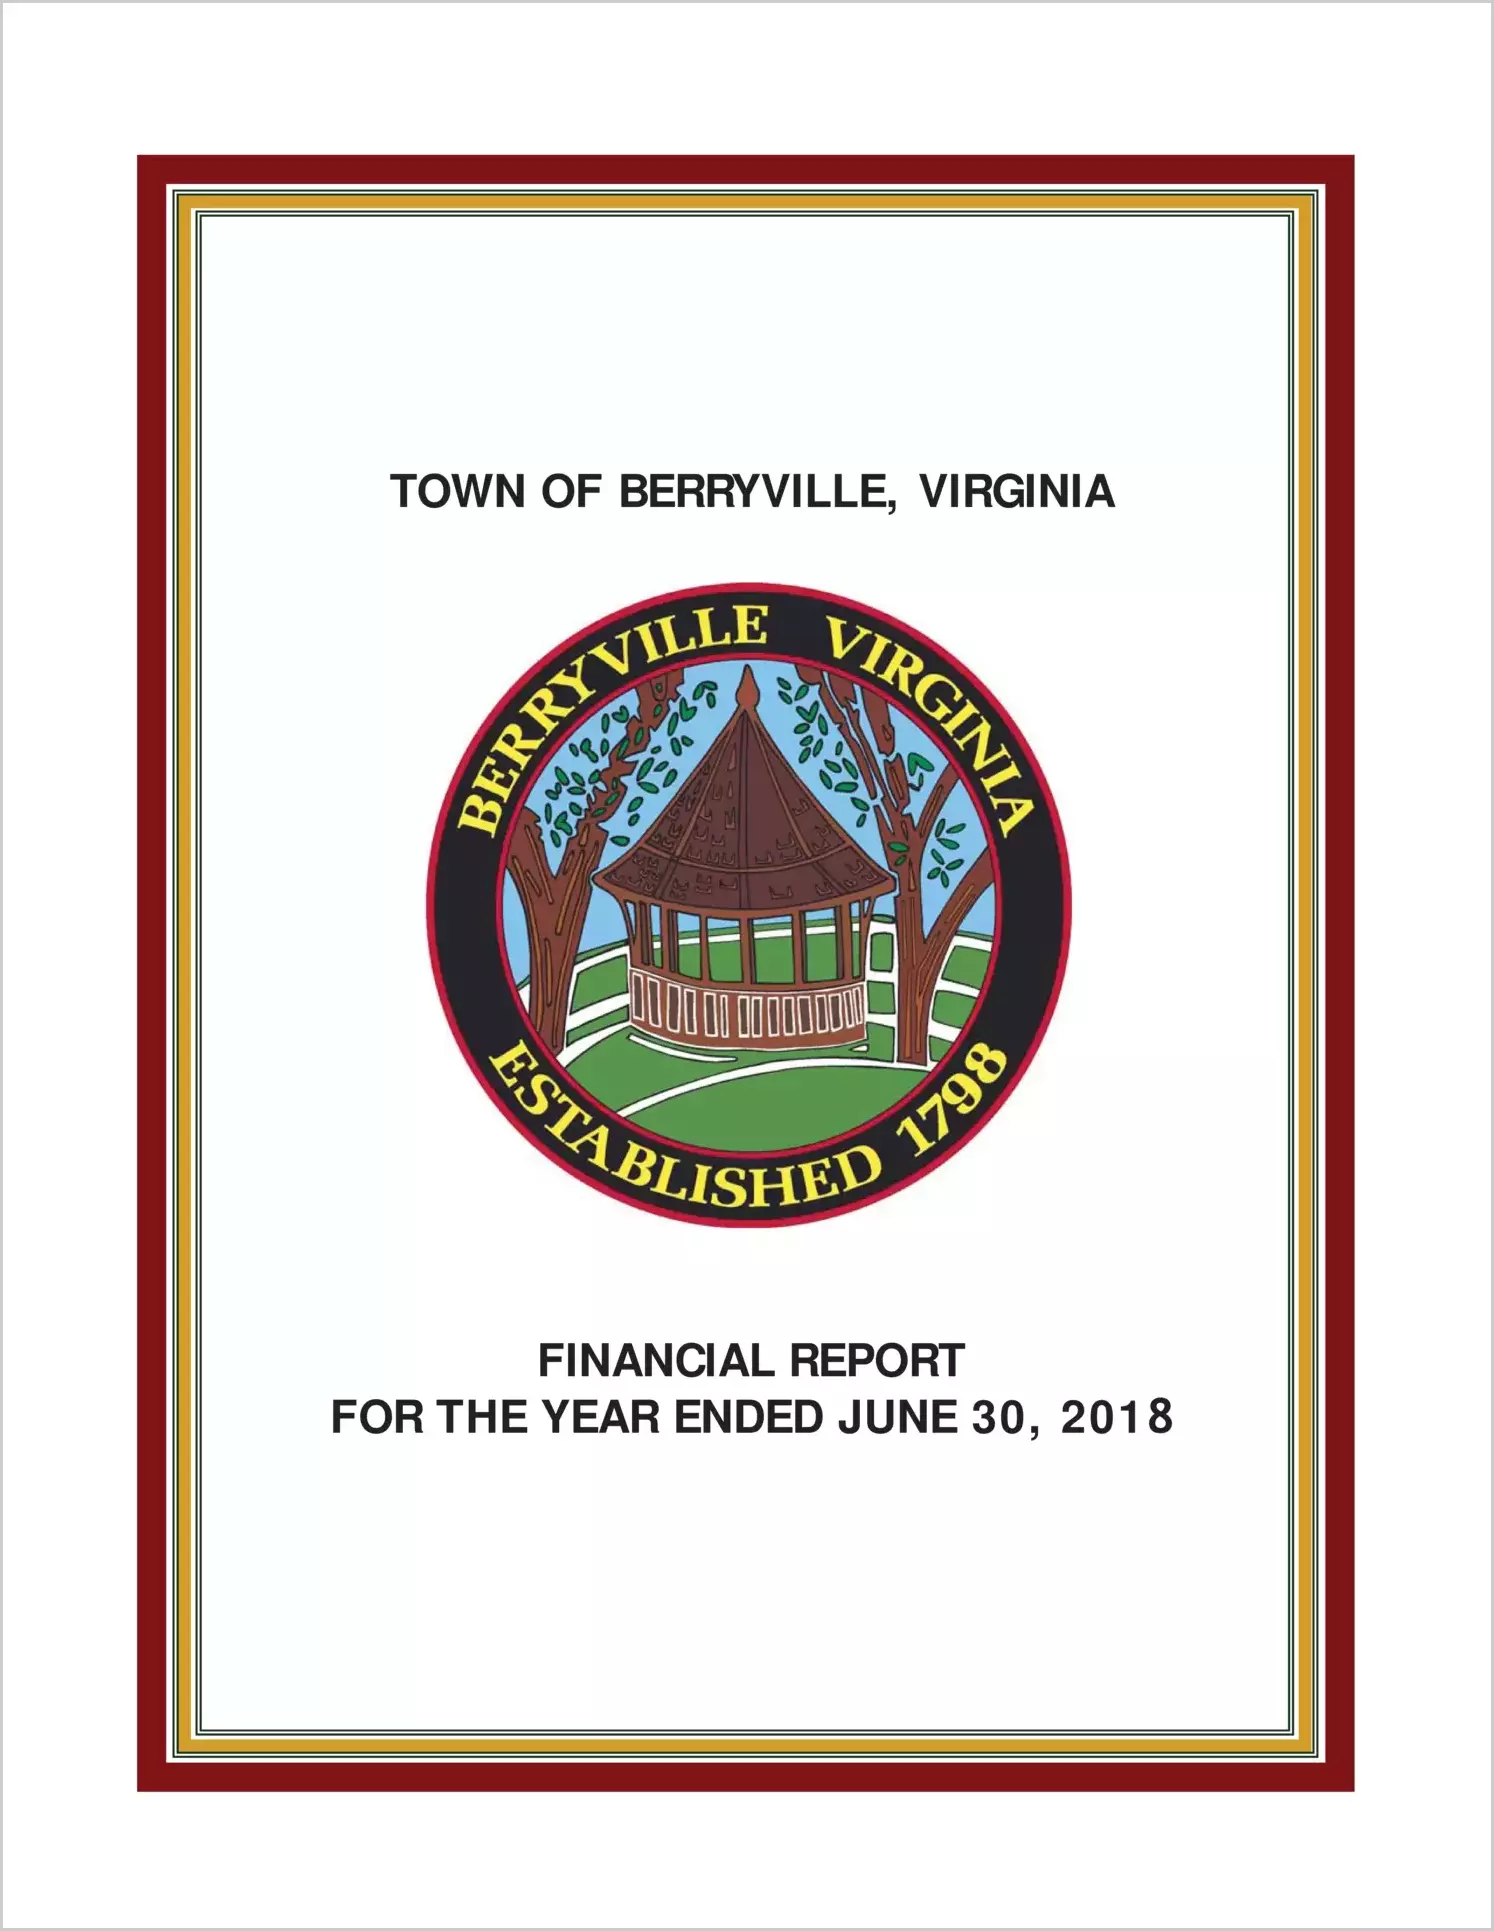 2018 Annual Financial Report for Town of Berryville